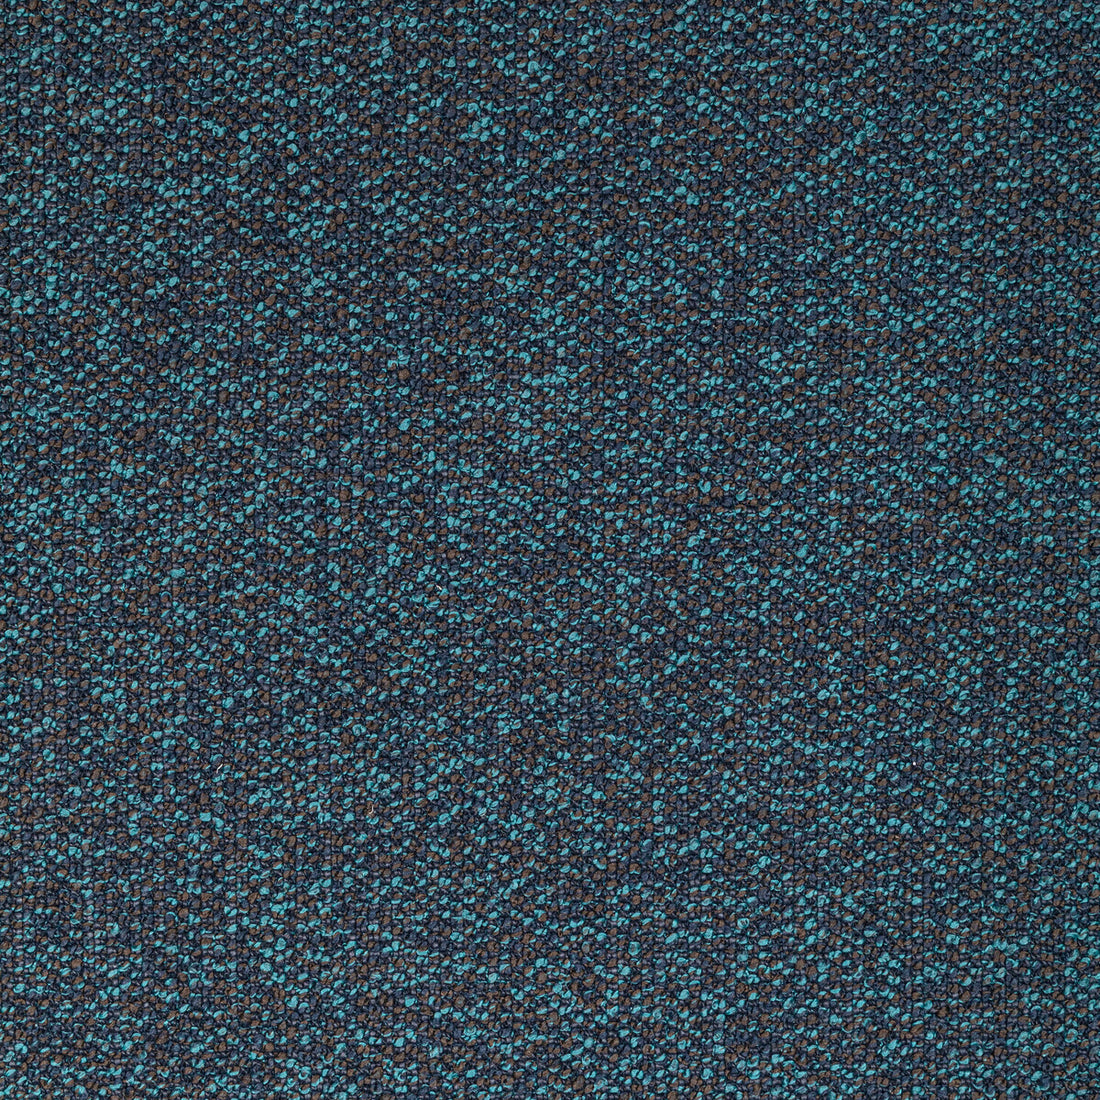 Mathis fabric in midnight color - pattern 36699.5.0 - by Kravet Contract in the Refined Textures Performance Crypton collection